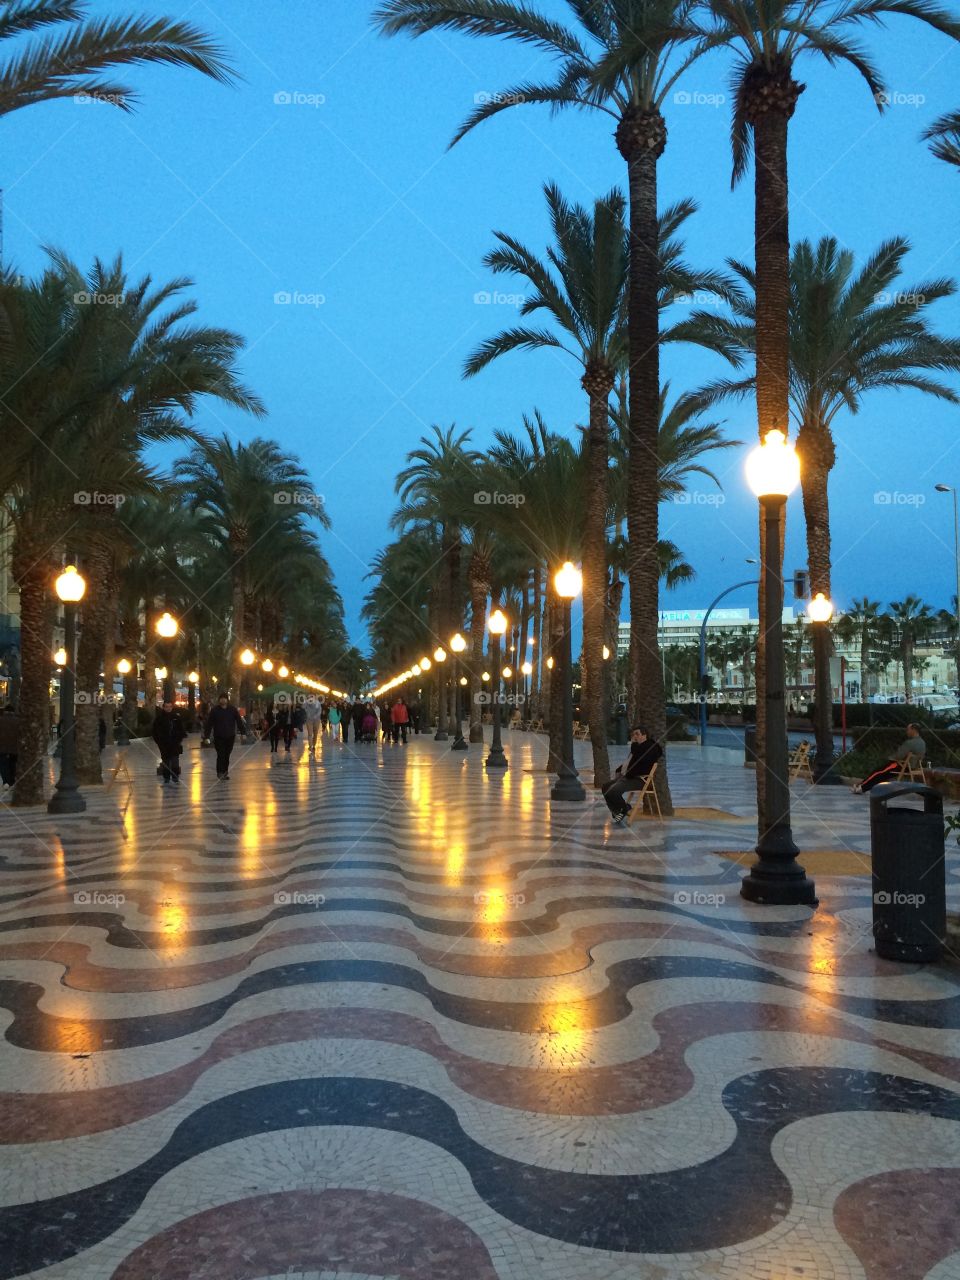 People walking along the palm-lined promenade at night